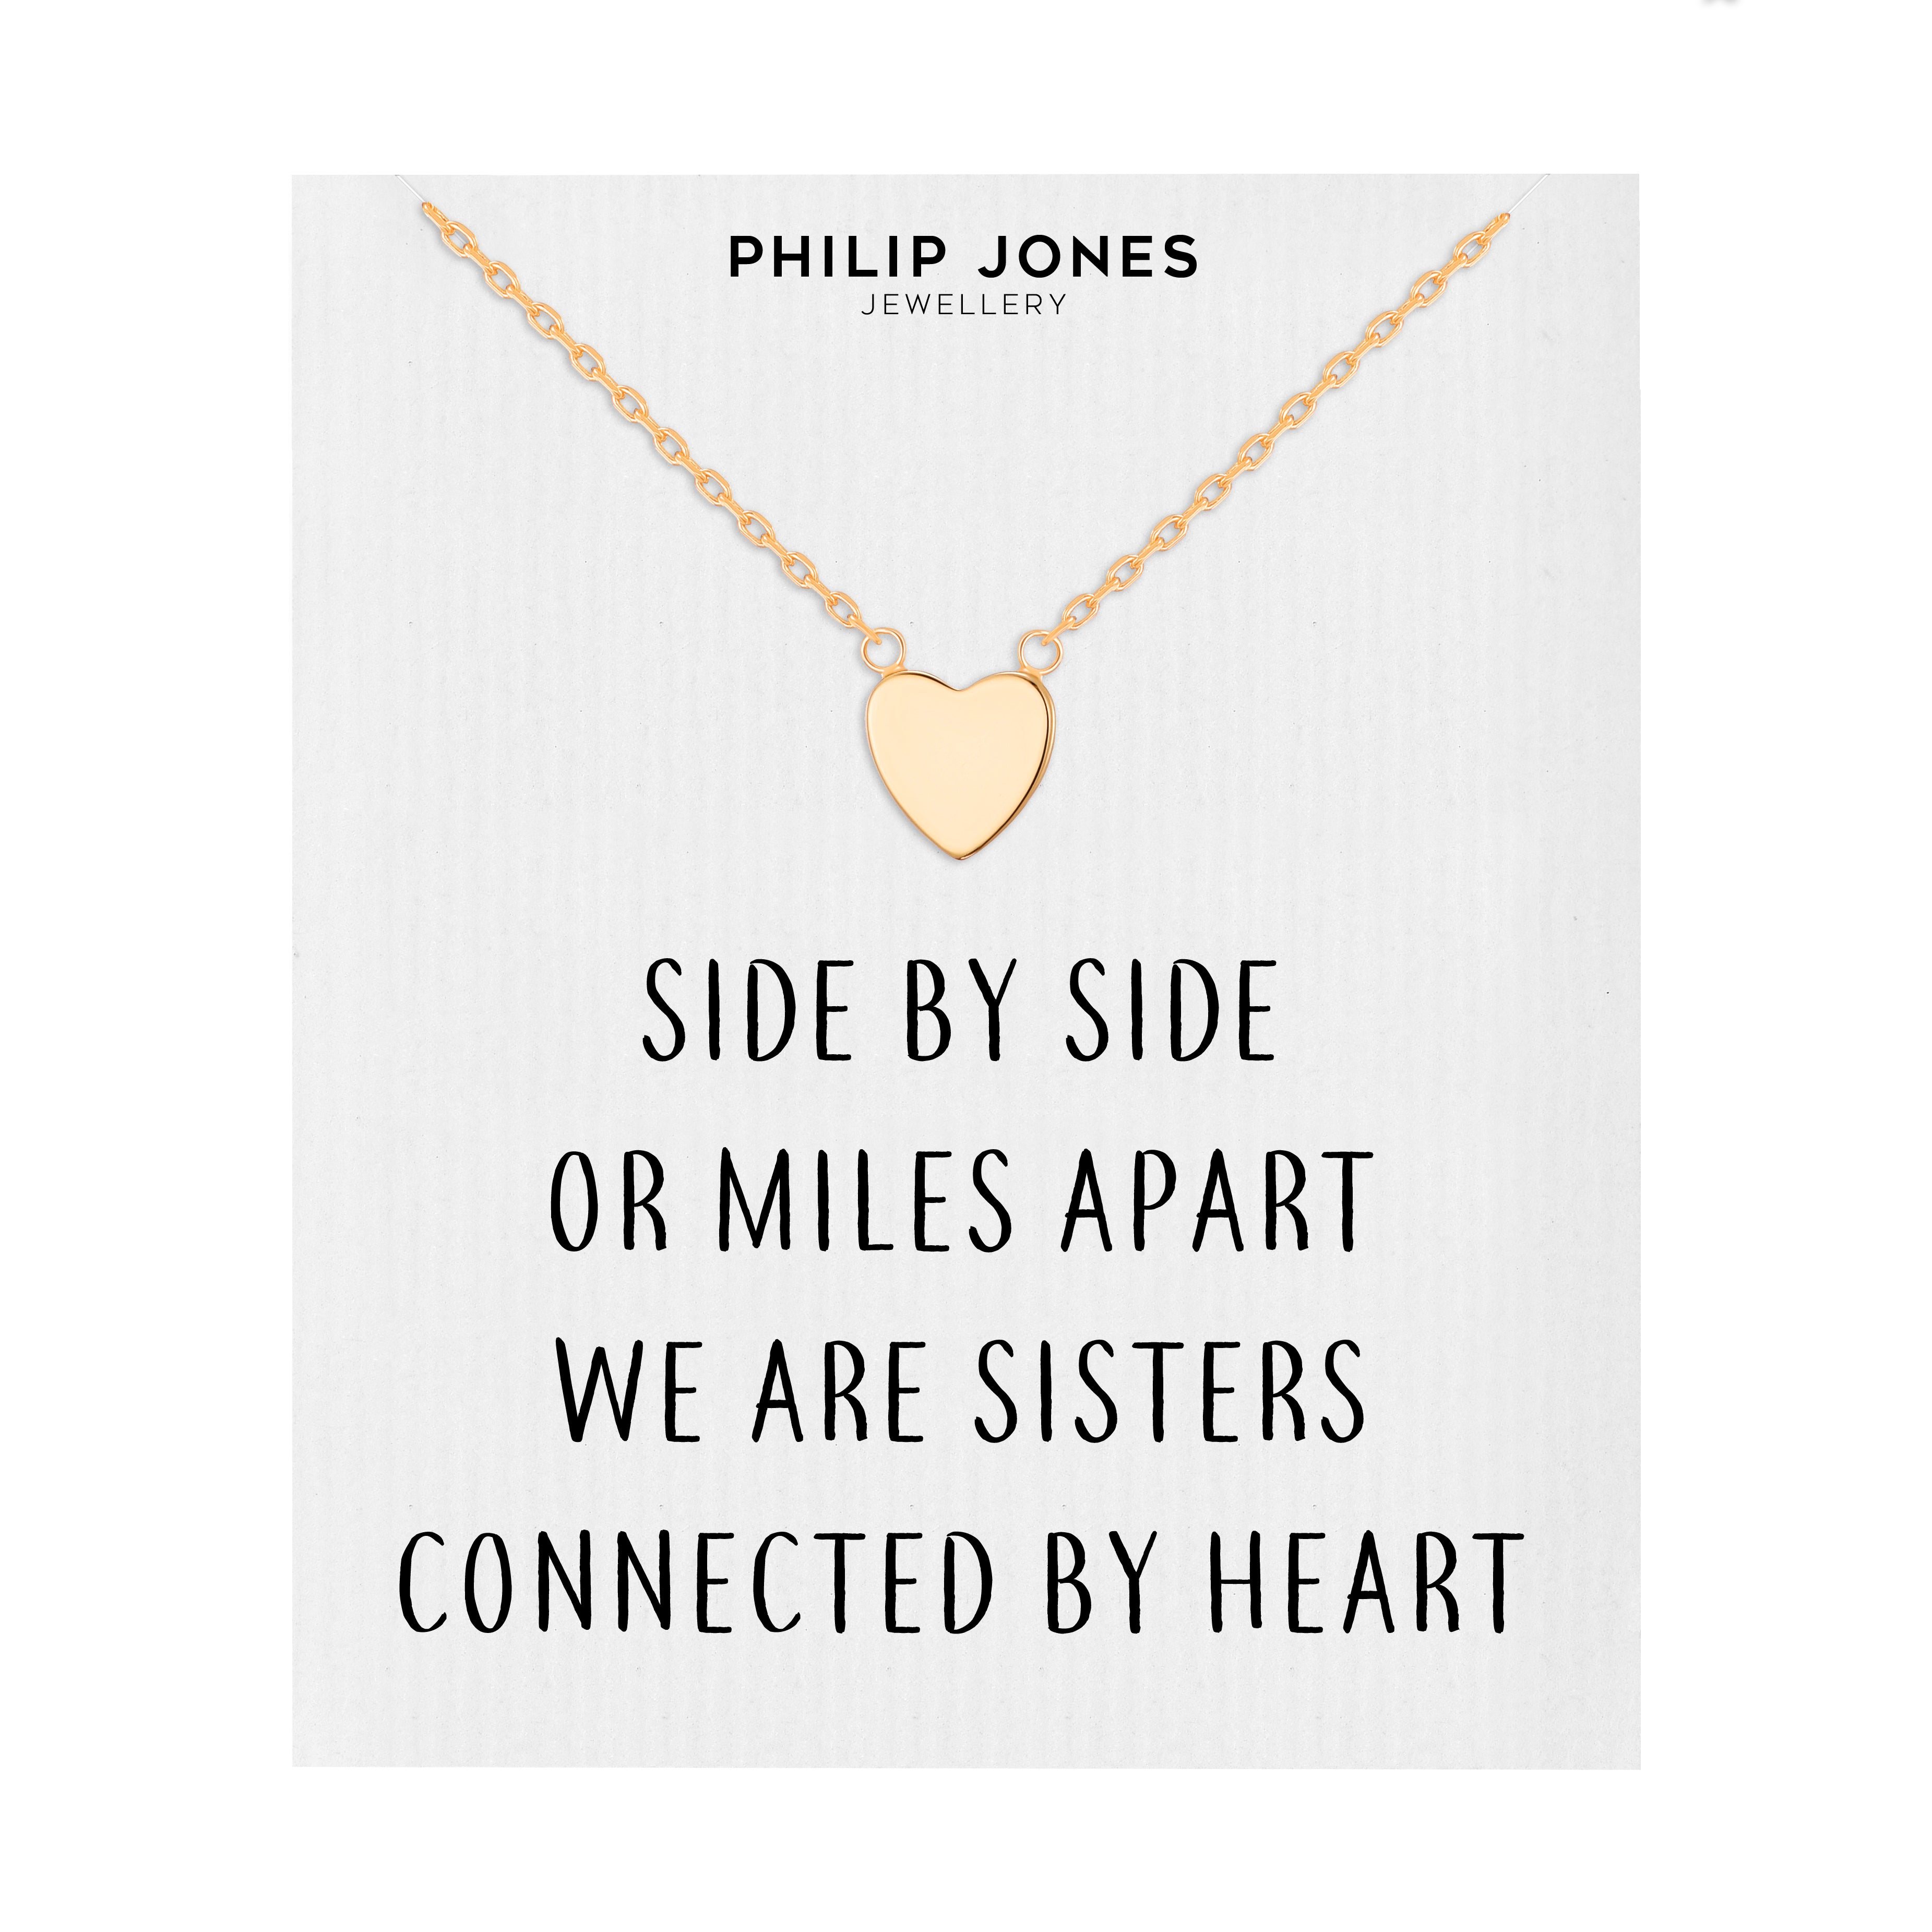 Gold Plated Sister Heart Necklace with Quote Card by Philip Jones Jewellery